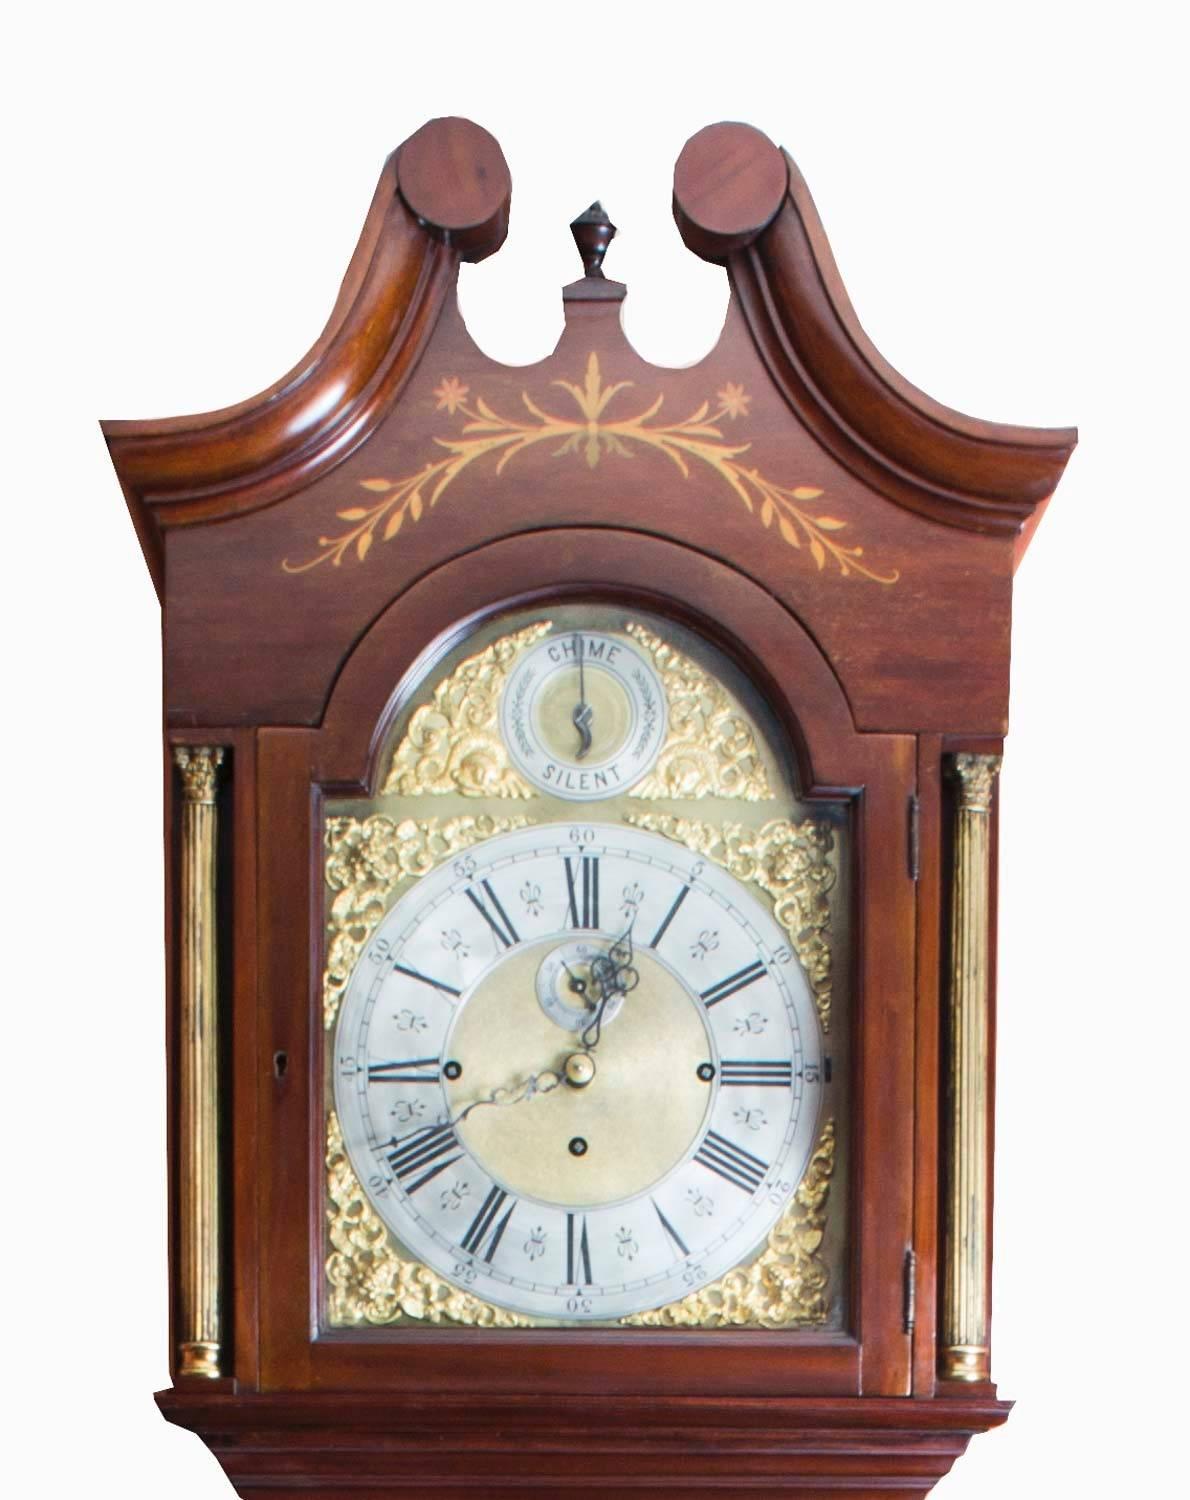 This is a beautiful antique late Victorian, marquetry, mahogany, 8 day, musical chiming longcase clock circa 1880 in date. 

It has an eight-day five pillar movement on an arch dial and chimes on 8 bells and a gong on each quarter hour. The clock